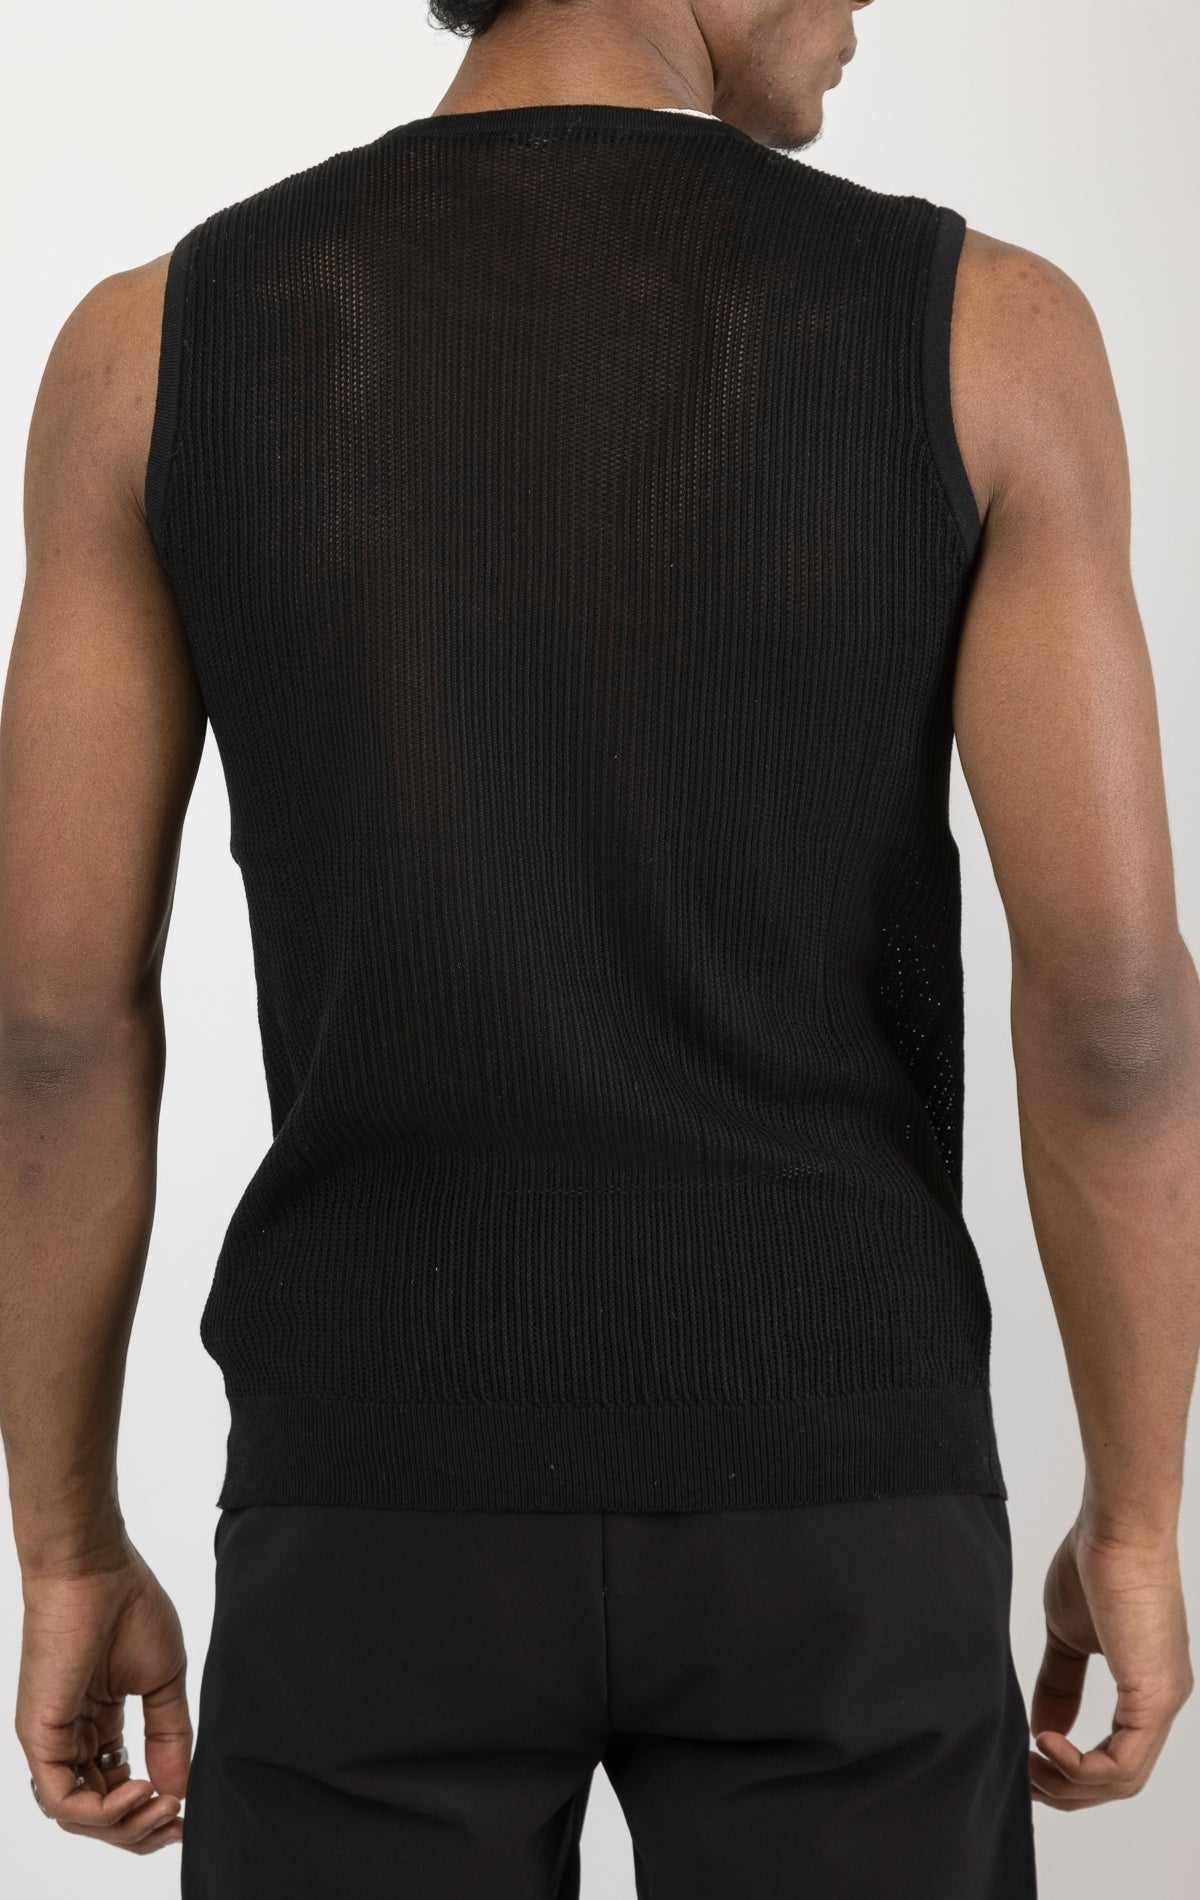 Men's crew neck mesh tank top in black. The tank top is made from a lightweight and breathable mesh fabric (50% cotton, 50% acrylic) and features a sleeveless construction and a tailored fit.